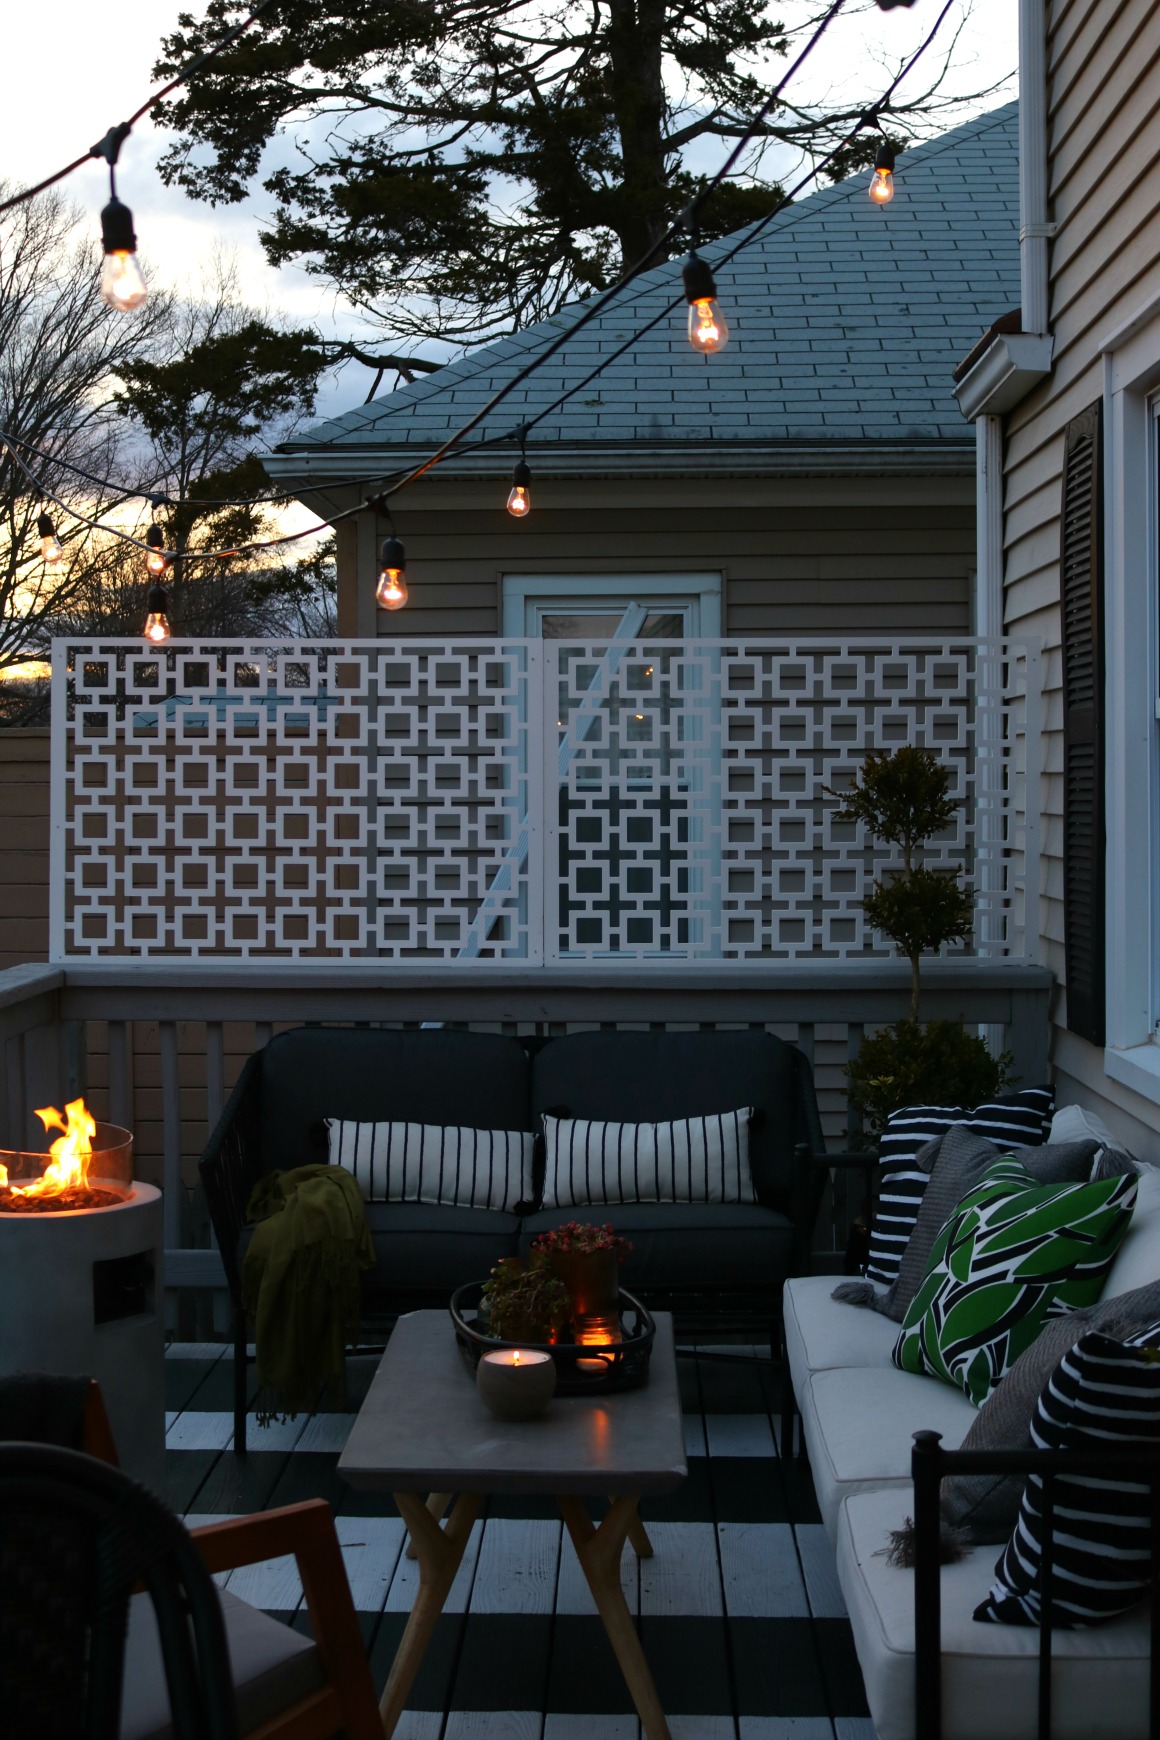 How We Hung Our Deck String Lights, How To Hang Outdoor String Lights Without Drilling